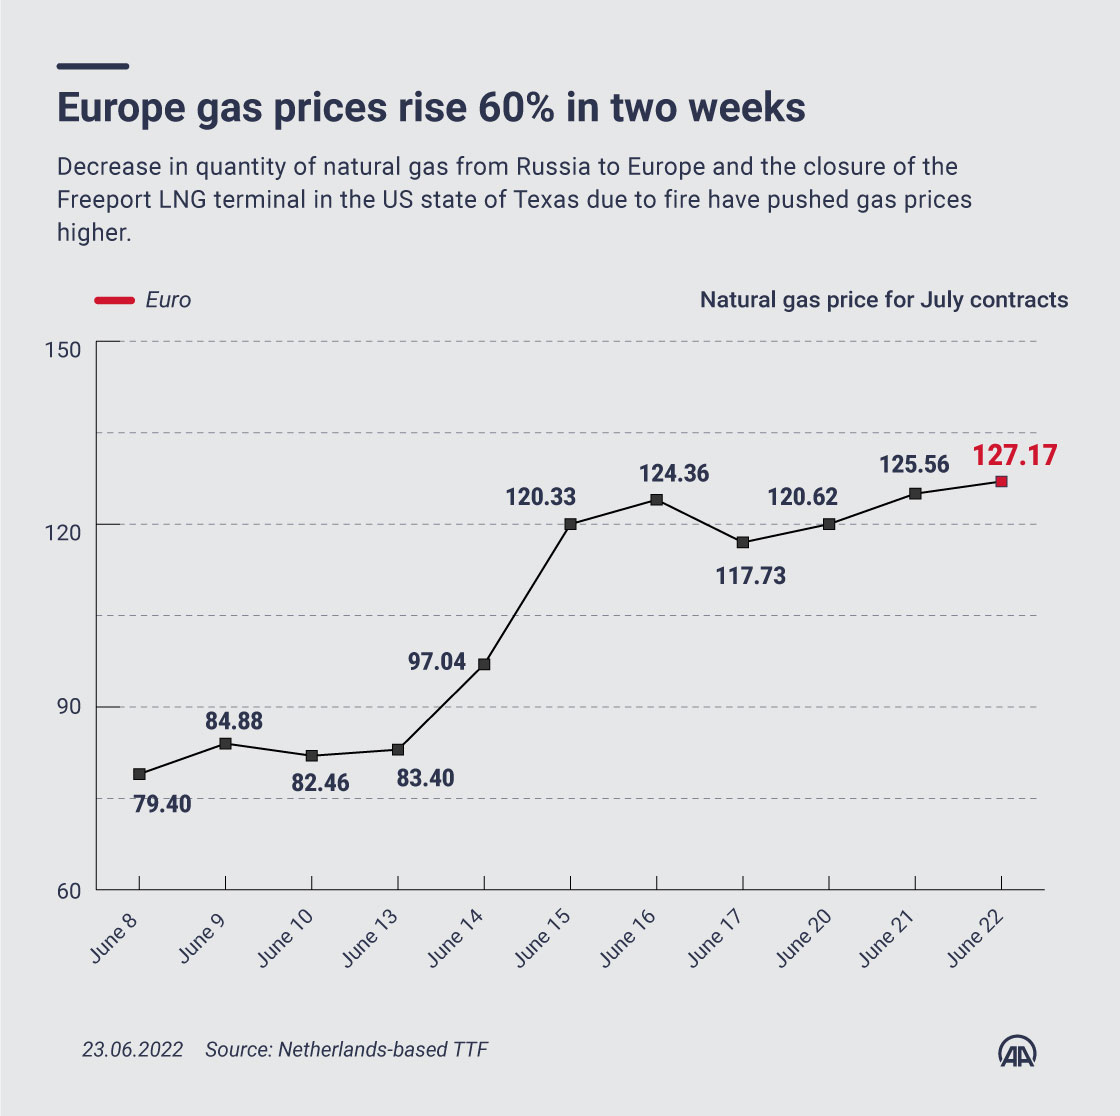 Europe gas prices rise 60% in two weeks as Russia reduces supply